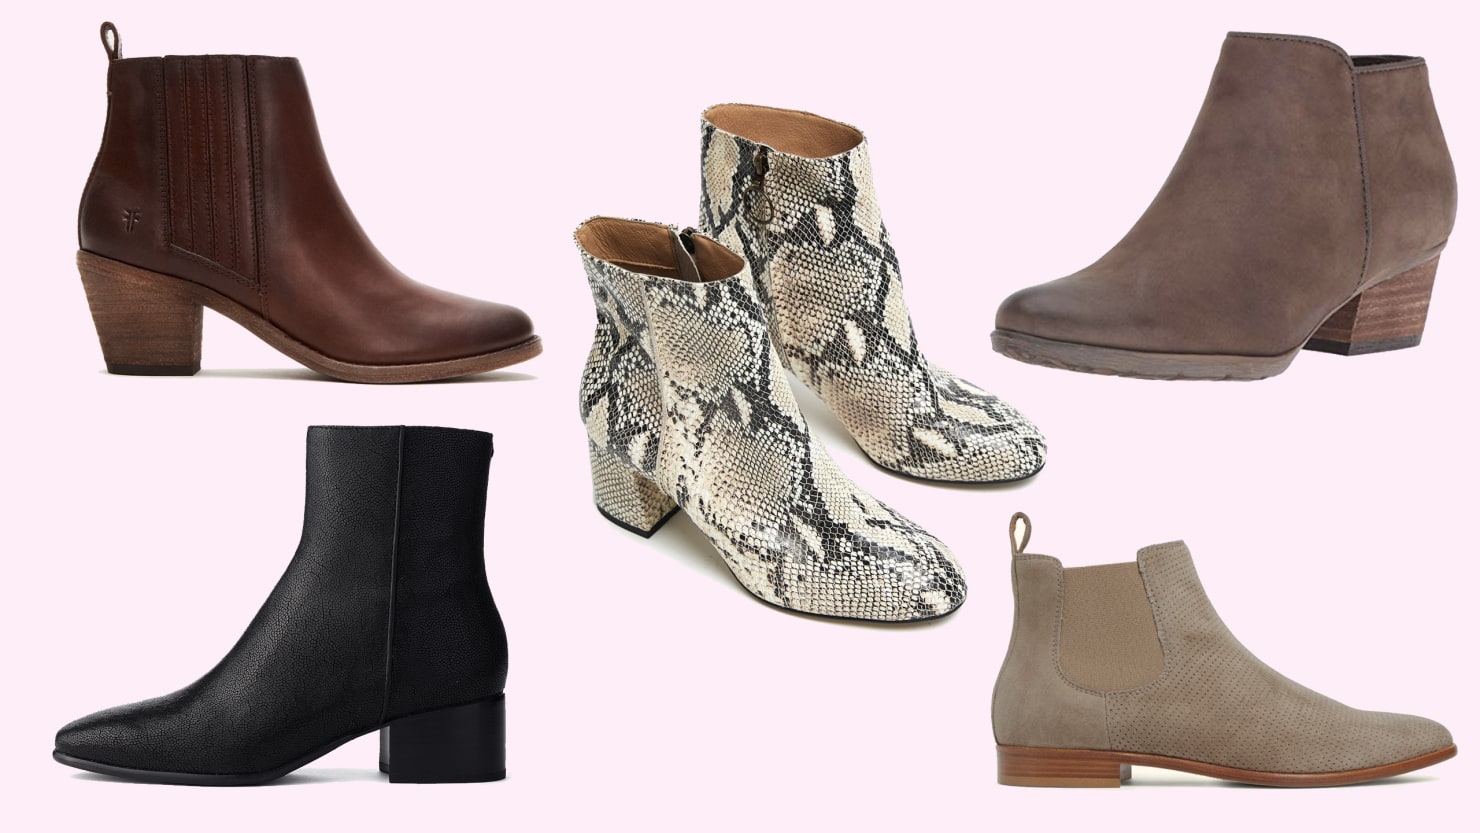 Ankle Boots To Wear With Dresses This Fall